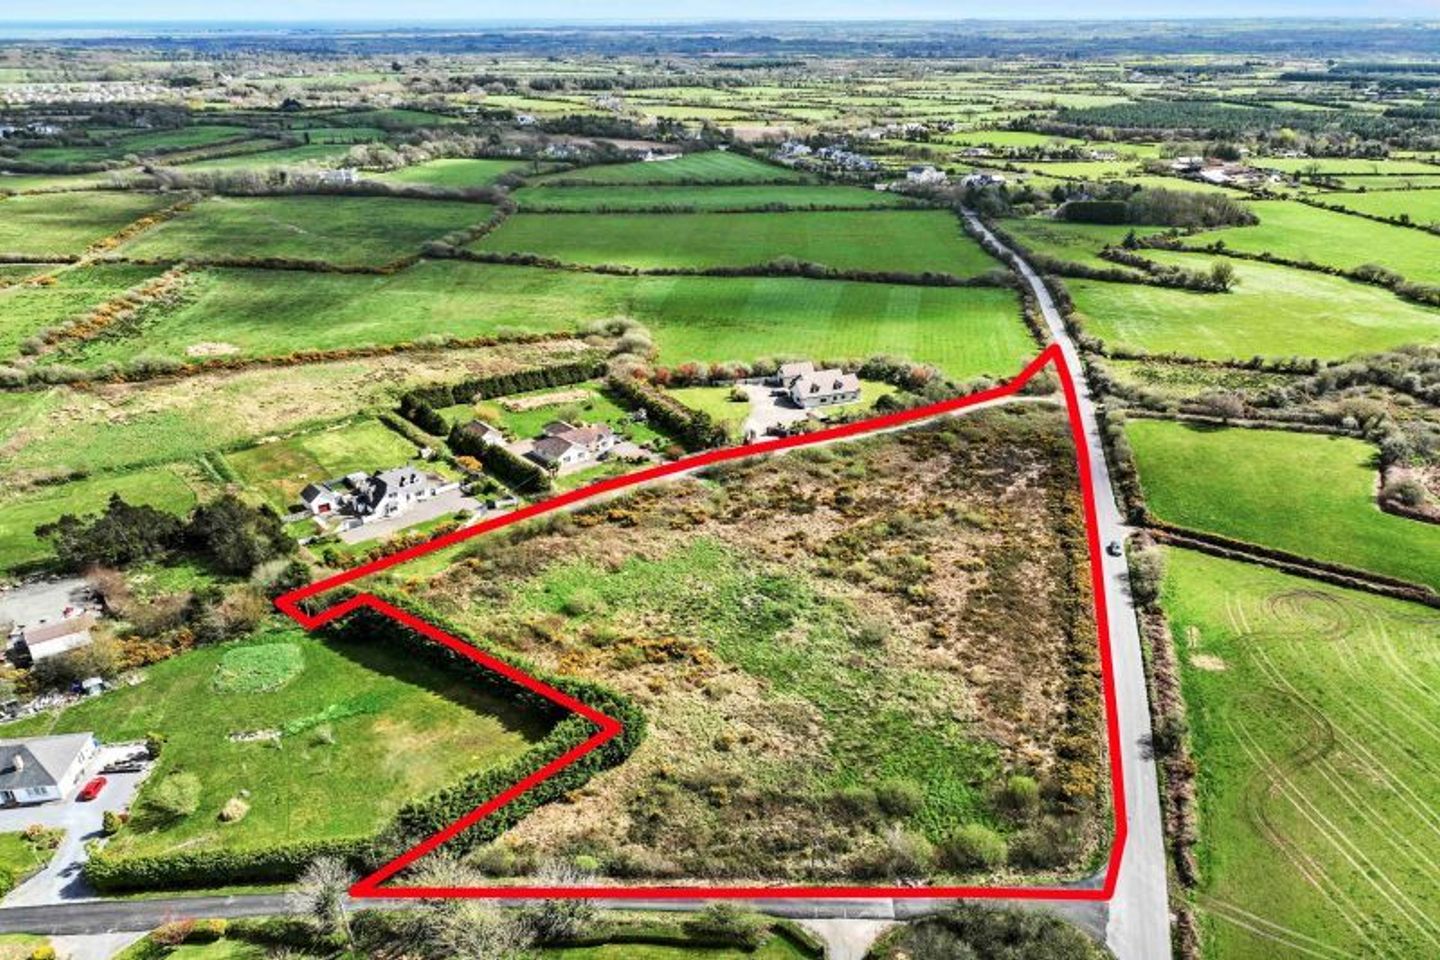 c. 4.27 Acre Site at Gorteenminogue, Murrintown, Co. Wexford